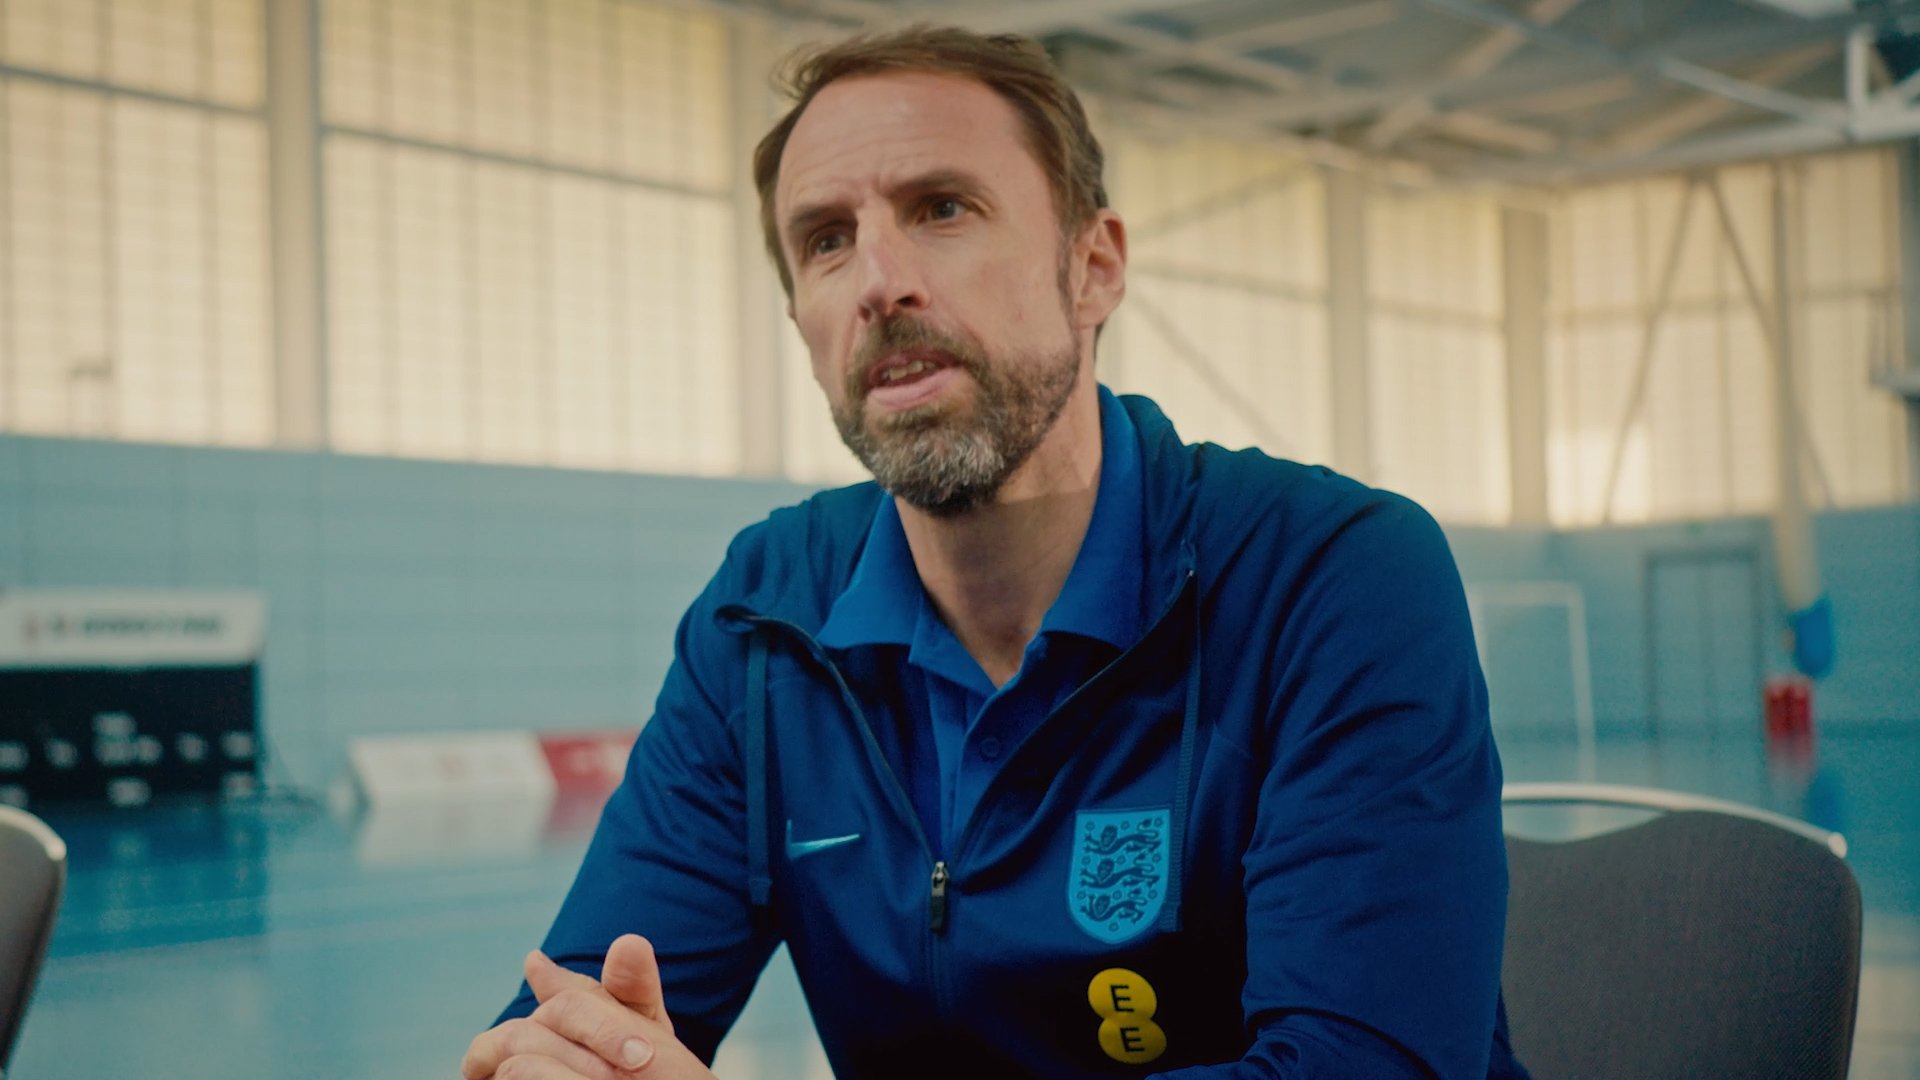 Delivery - M&S_Gareth Southgate_Kids Interview OPT 1 - 16x9_No Subs.00_00_03_04.Still001.jpg